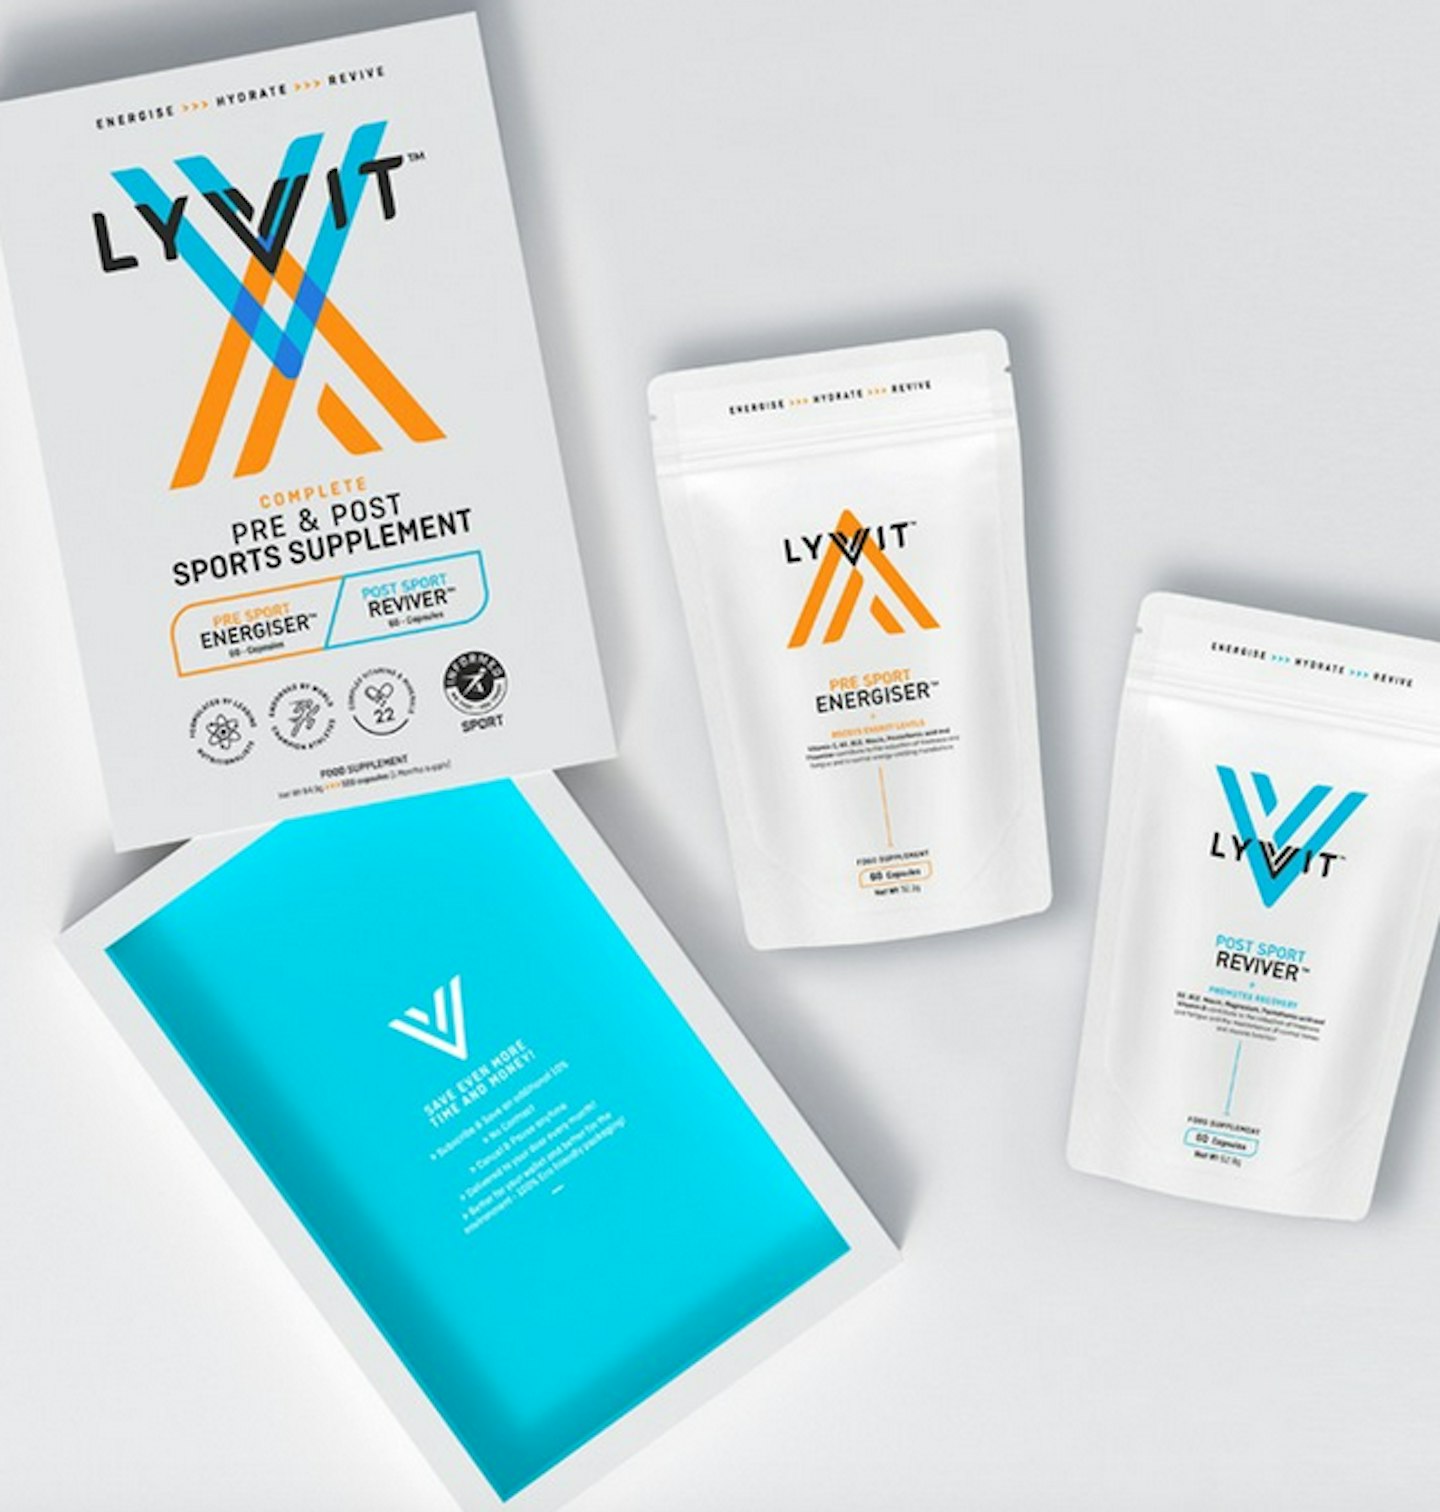 LyVit Pre and Post Sports Supplement, from £24.95